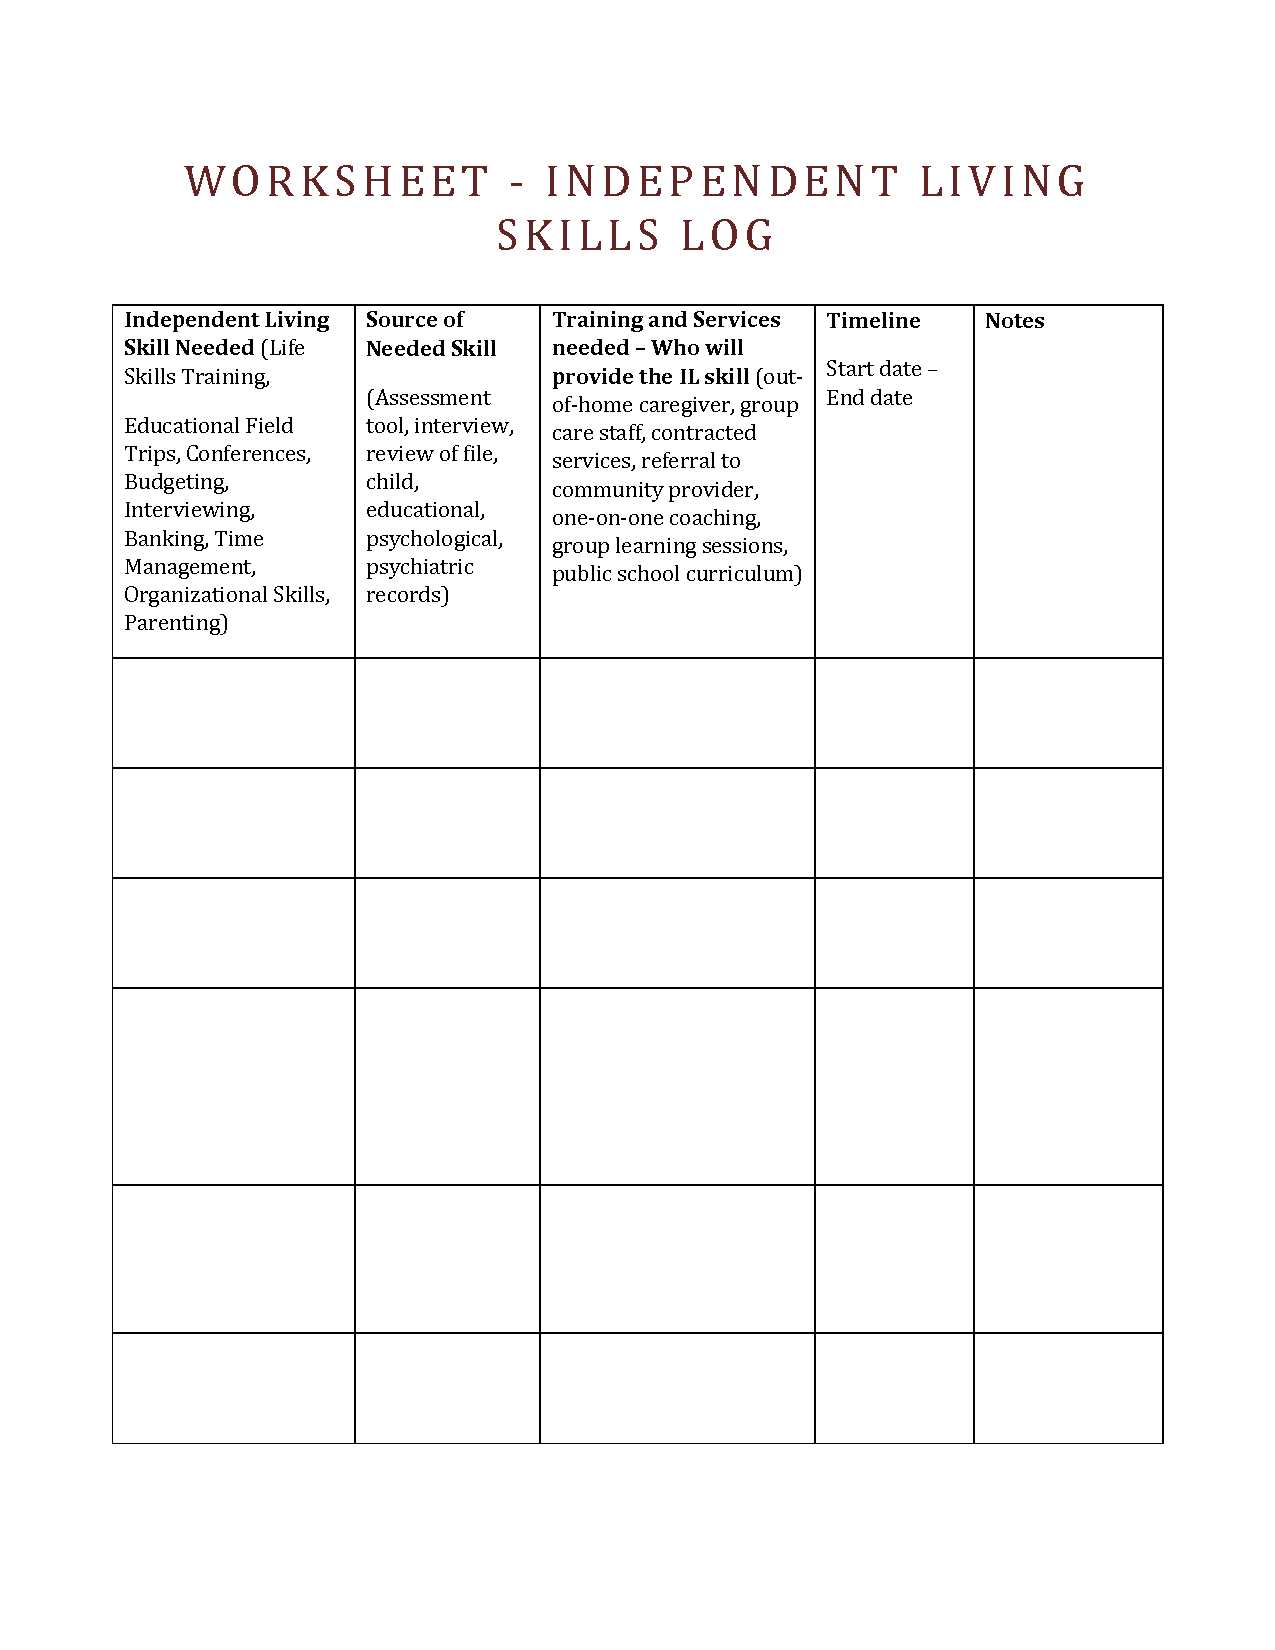 Life Skills Worksheets Pdf with Bud Ing Skillsrksheets Independent Living for Adults Teaching